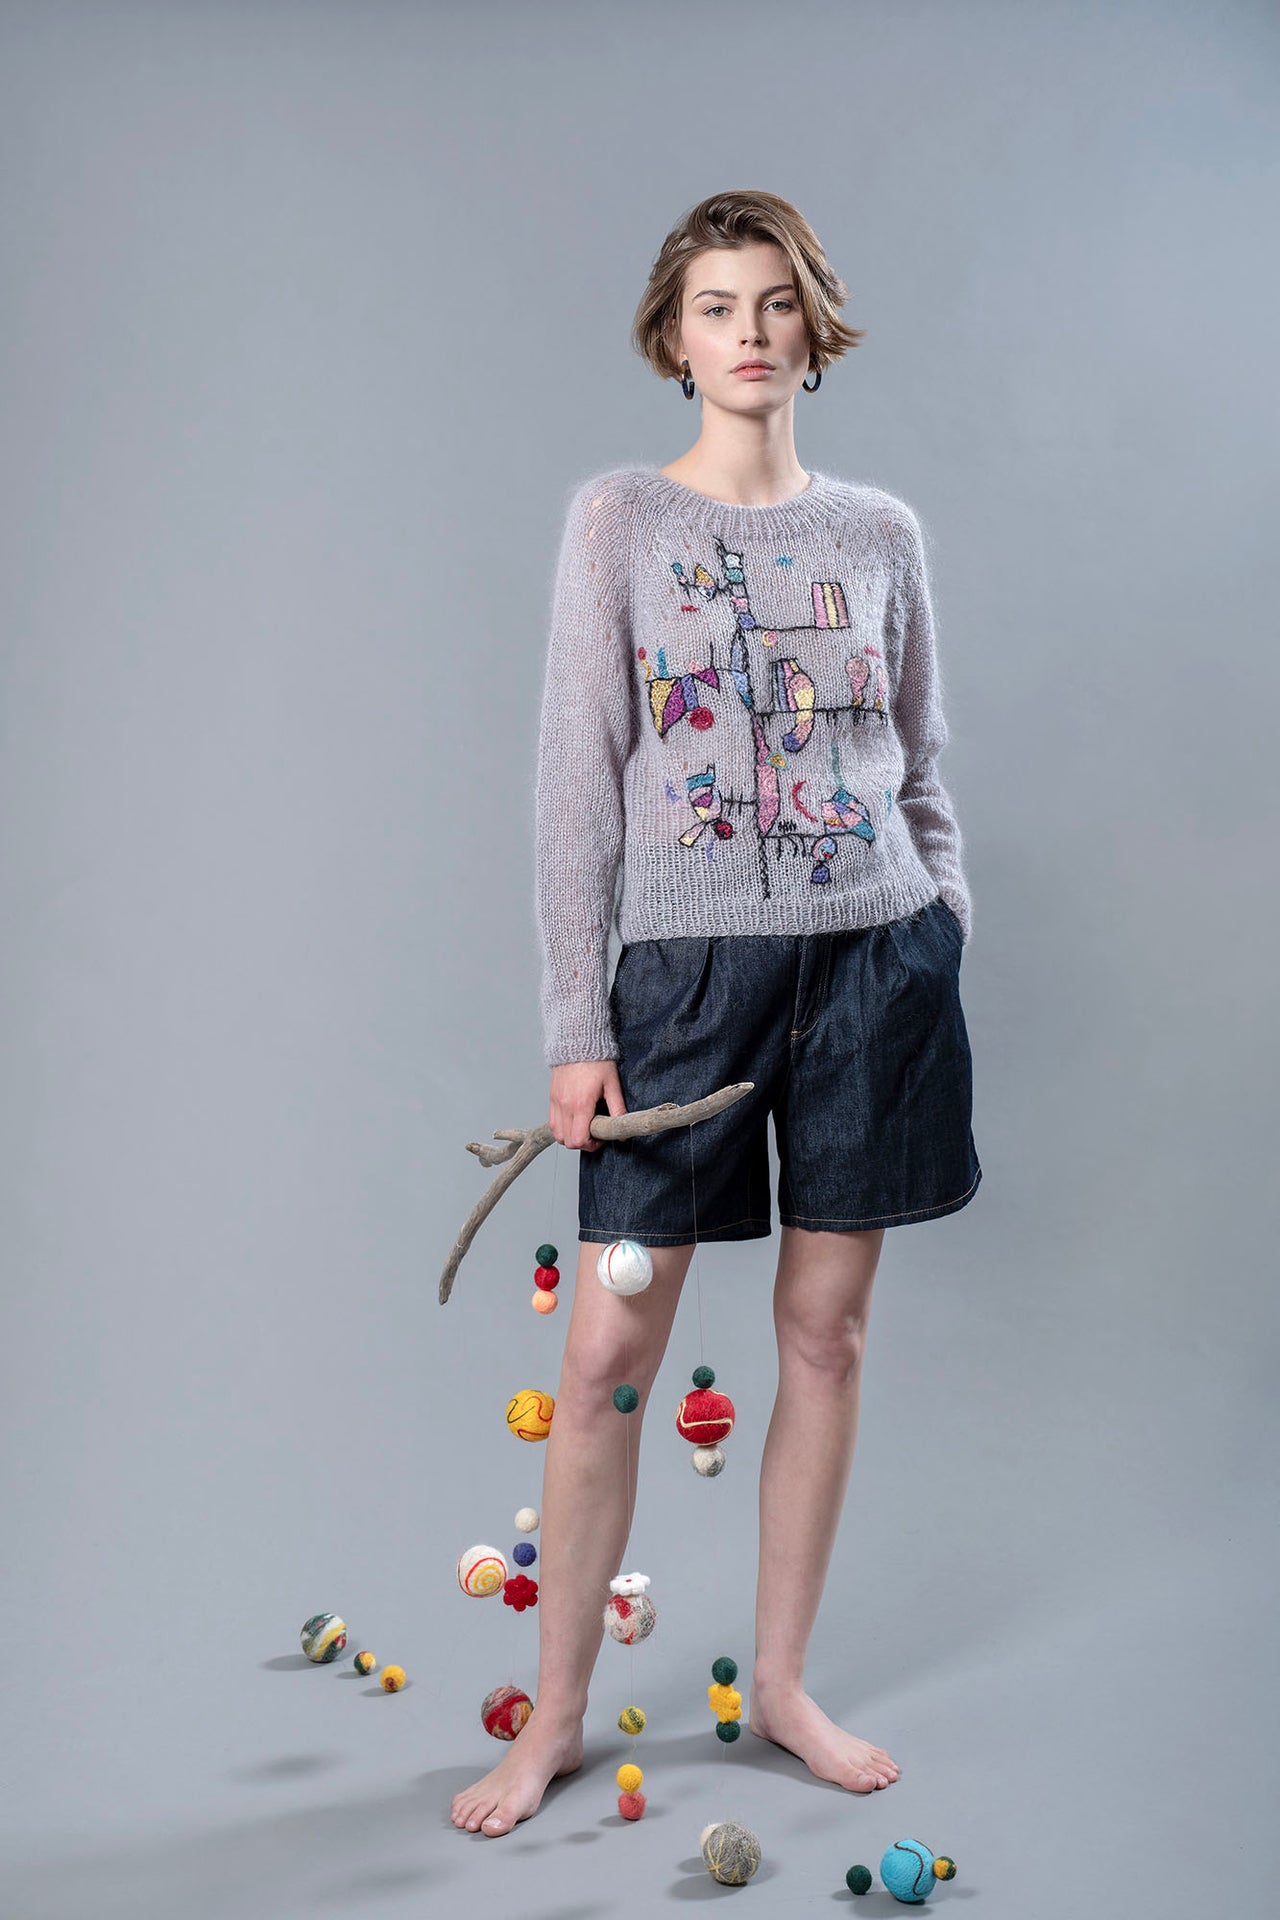 Woman wearing a grey mohair sweater and holding in her right hand a wooden stick from which wool balls are hanging. The sweater has colourful abstract embroidered patterns and shapes on the front.. 